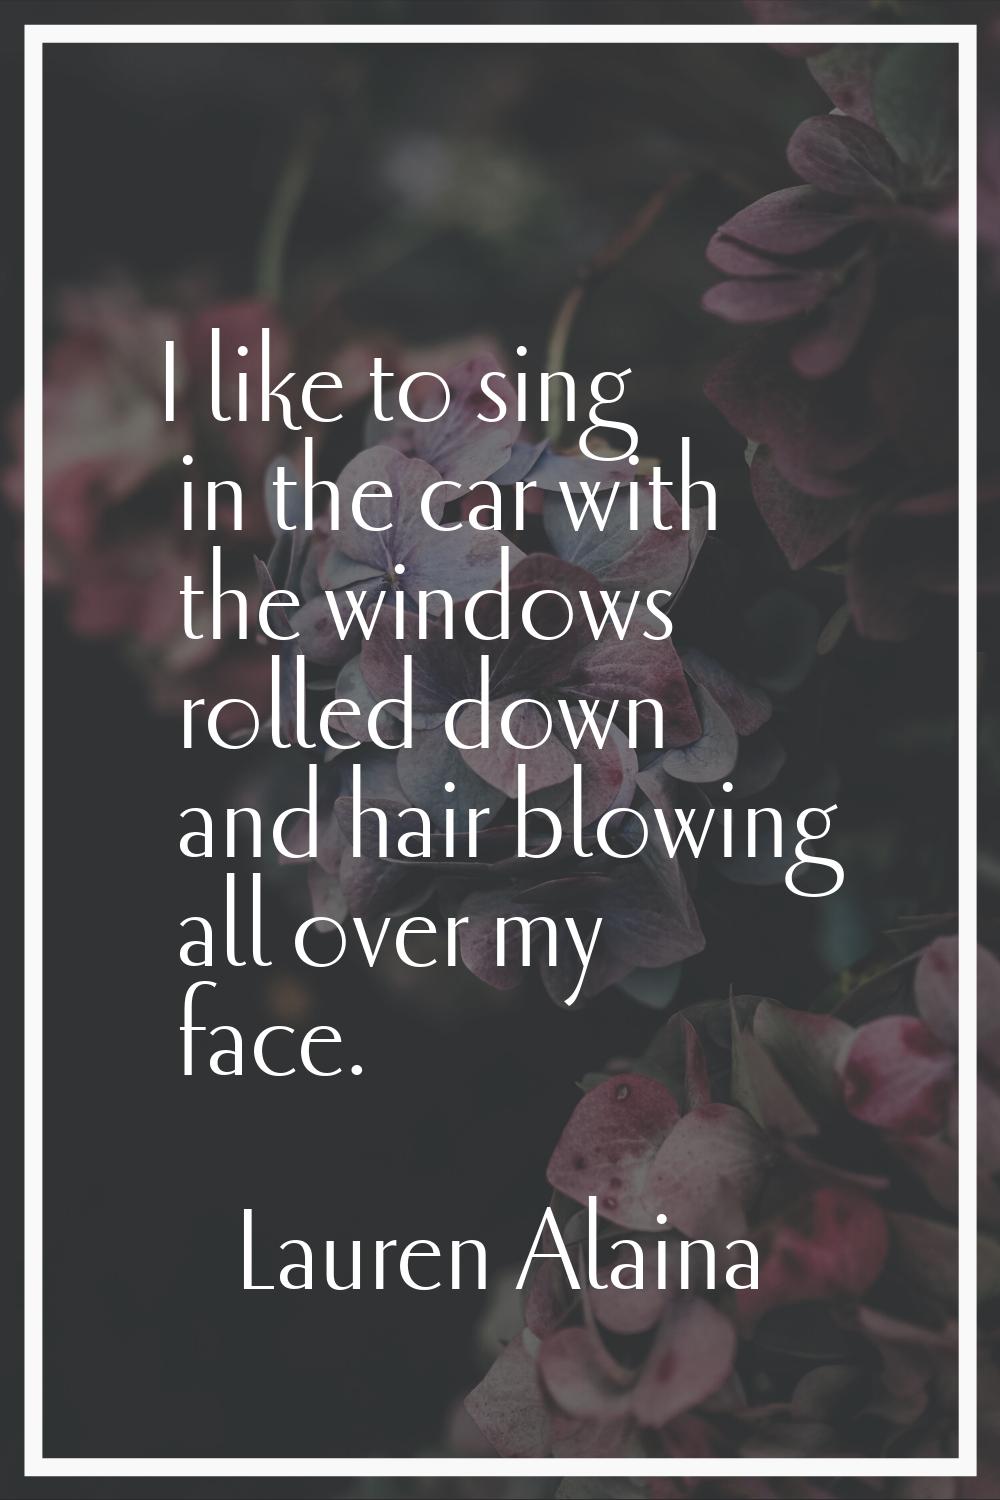 I like to sing in the car with the windows rolled down and hair blowing all over my face.